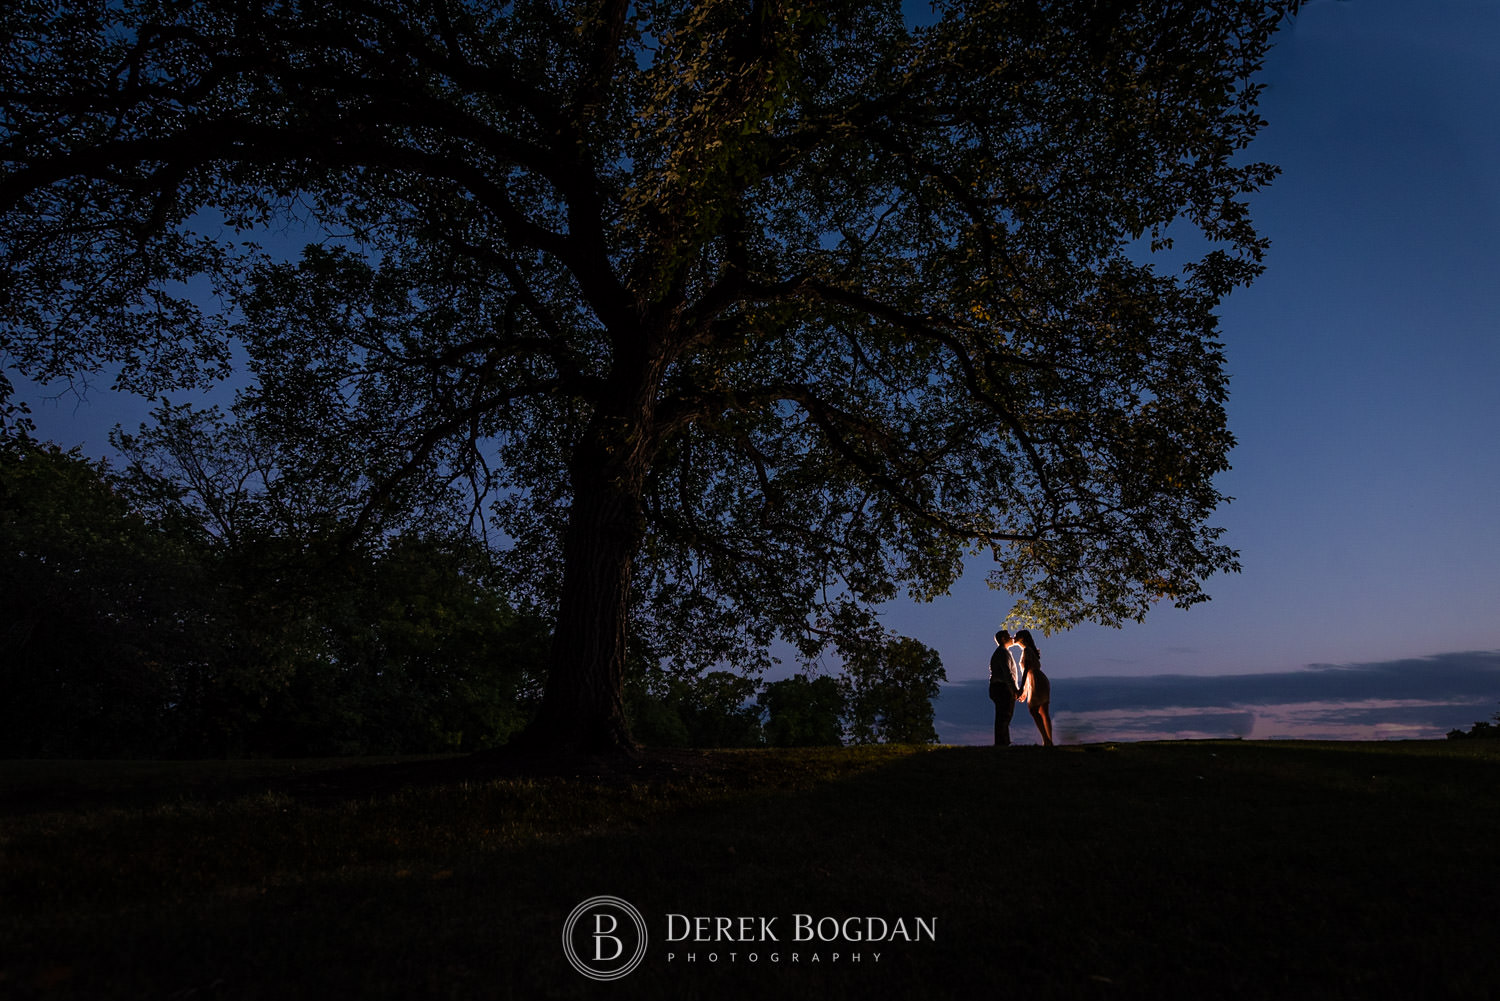 Evening engagement photo kiss by the tree at sunset